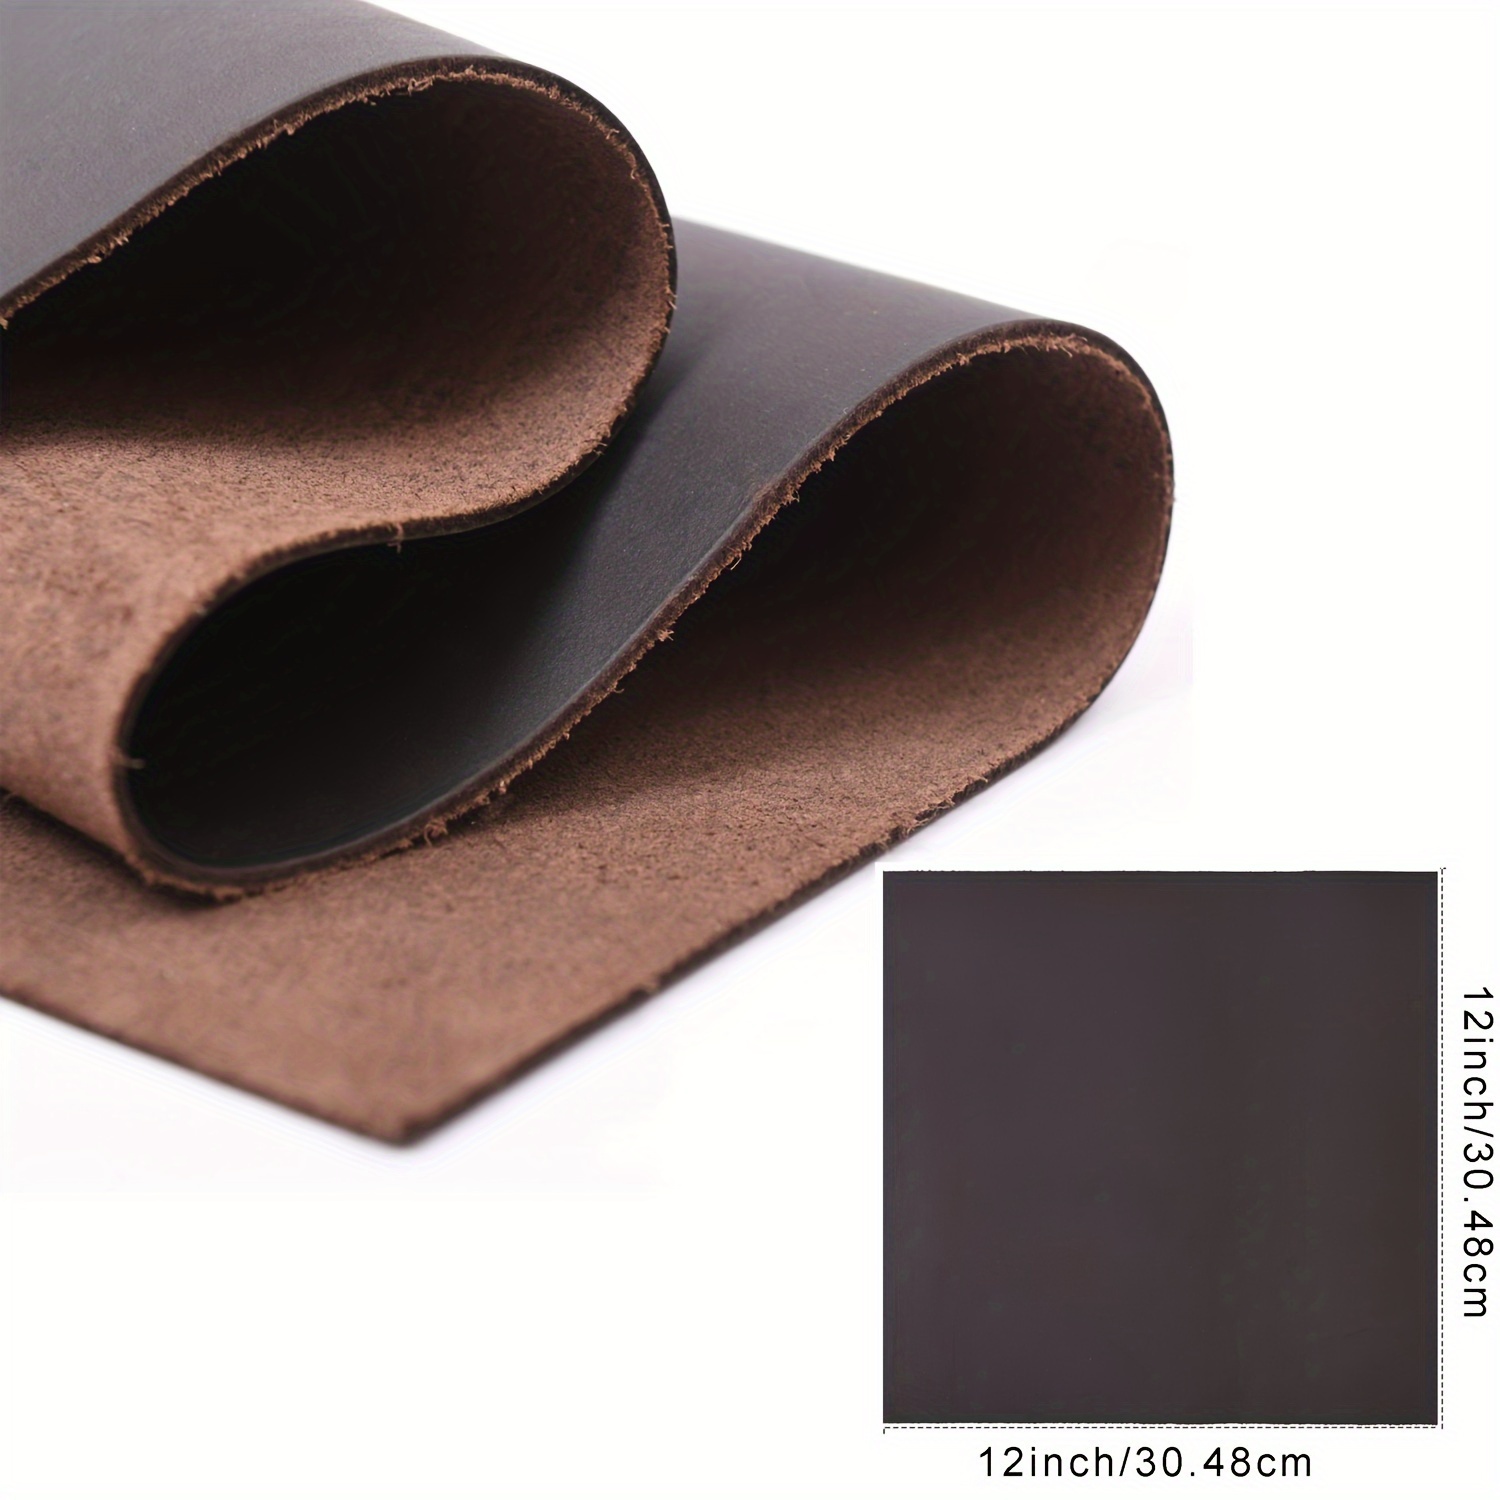 Full Grain Leather Pieces for Leather Working, Tooling Leather Sheets for  Crafts Genuine Leather Material 1.8-2.1 mm Thick Leather Hide for Crafting